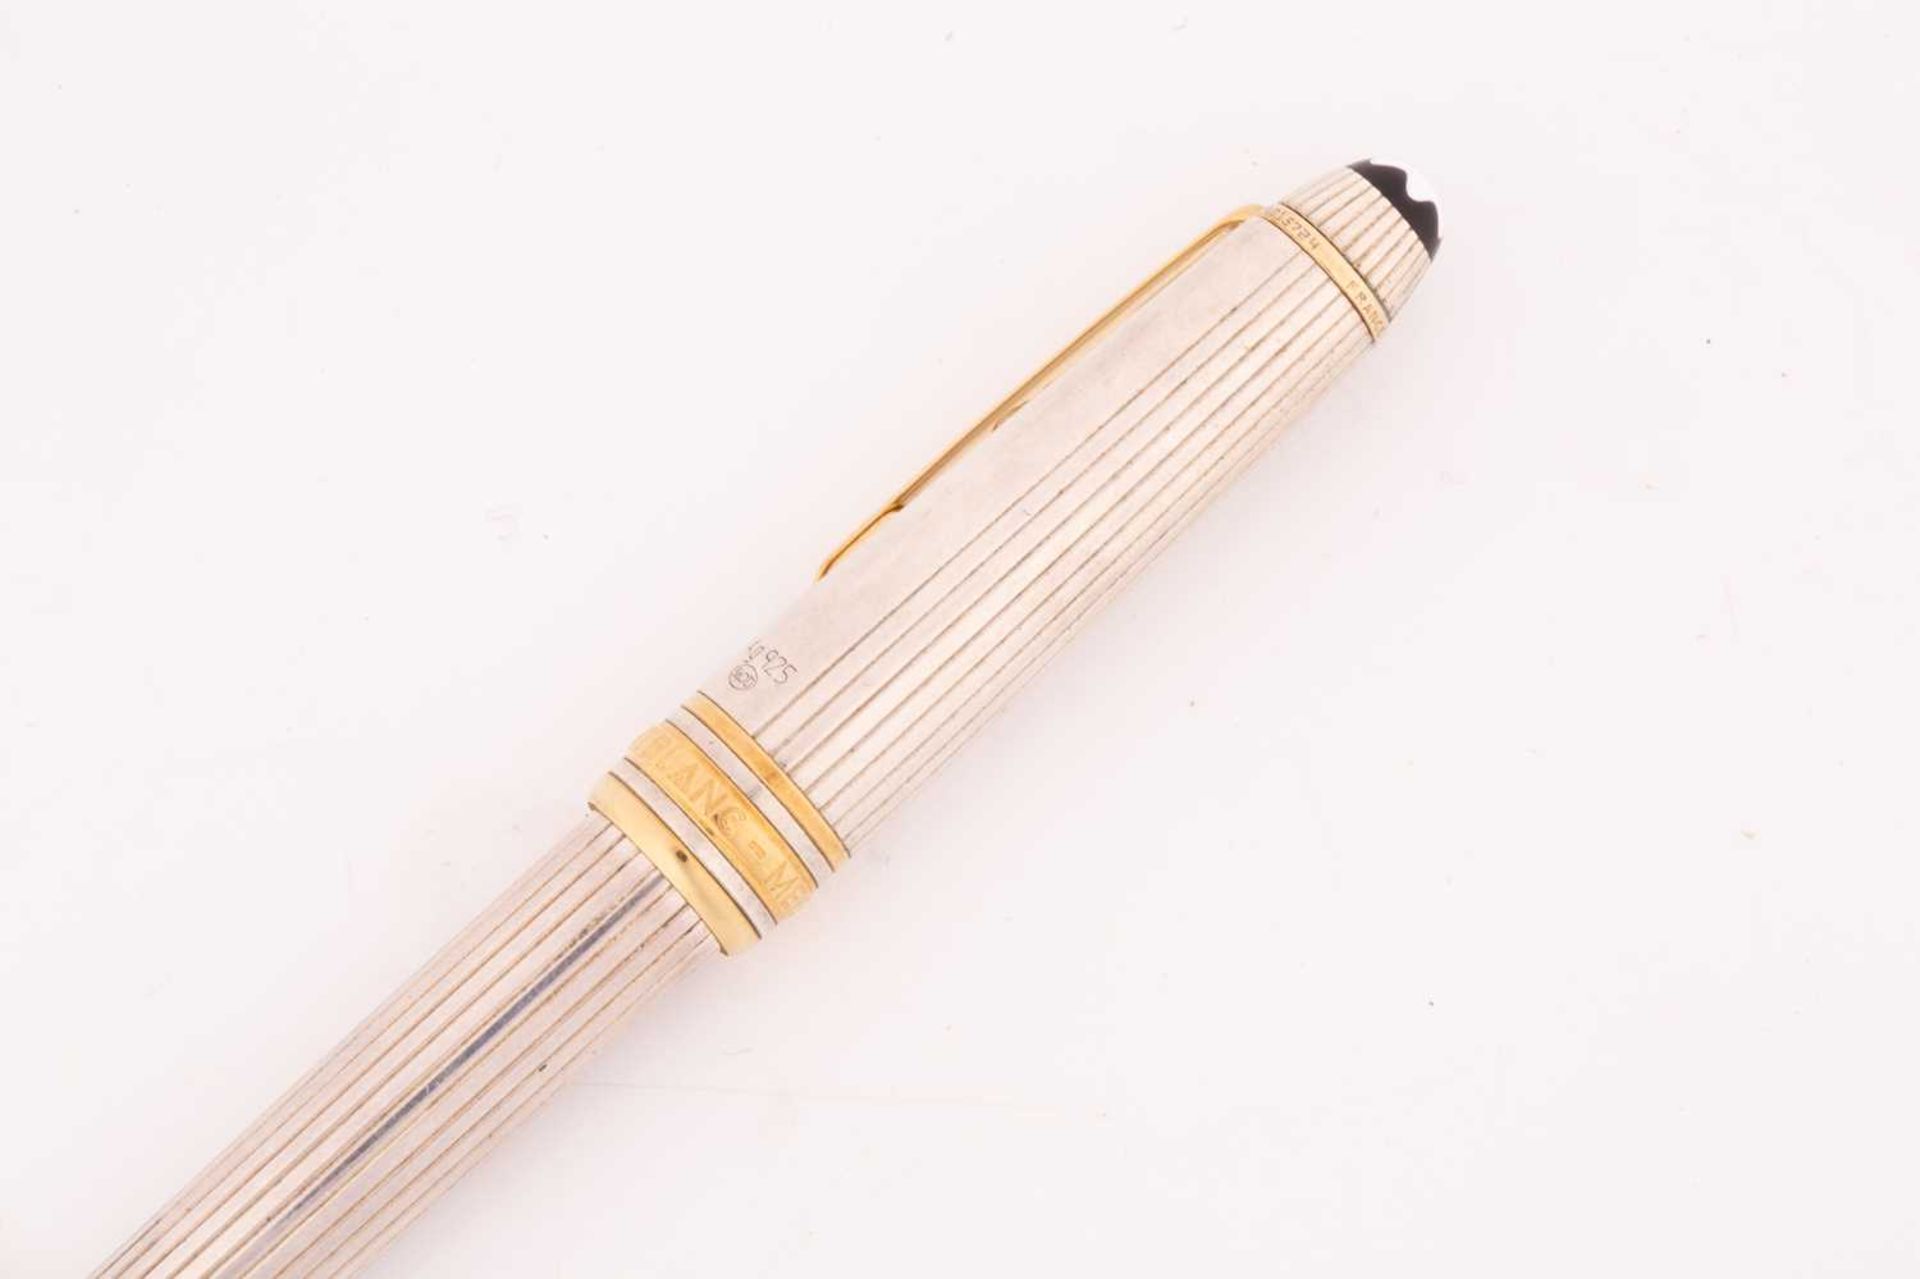 Montblanc Meisterstück silver fountain pen with gold-tone hardware, emblem inlaid into pull-off - Image 5 of 7